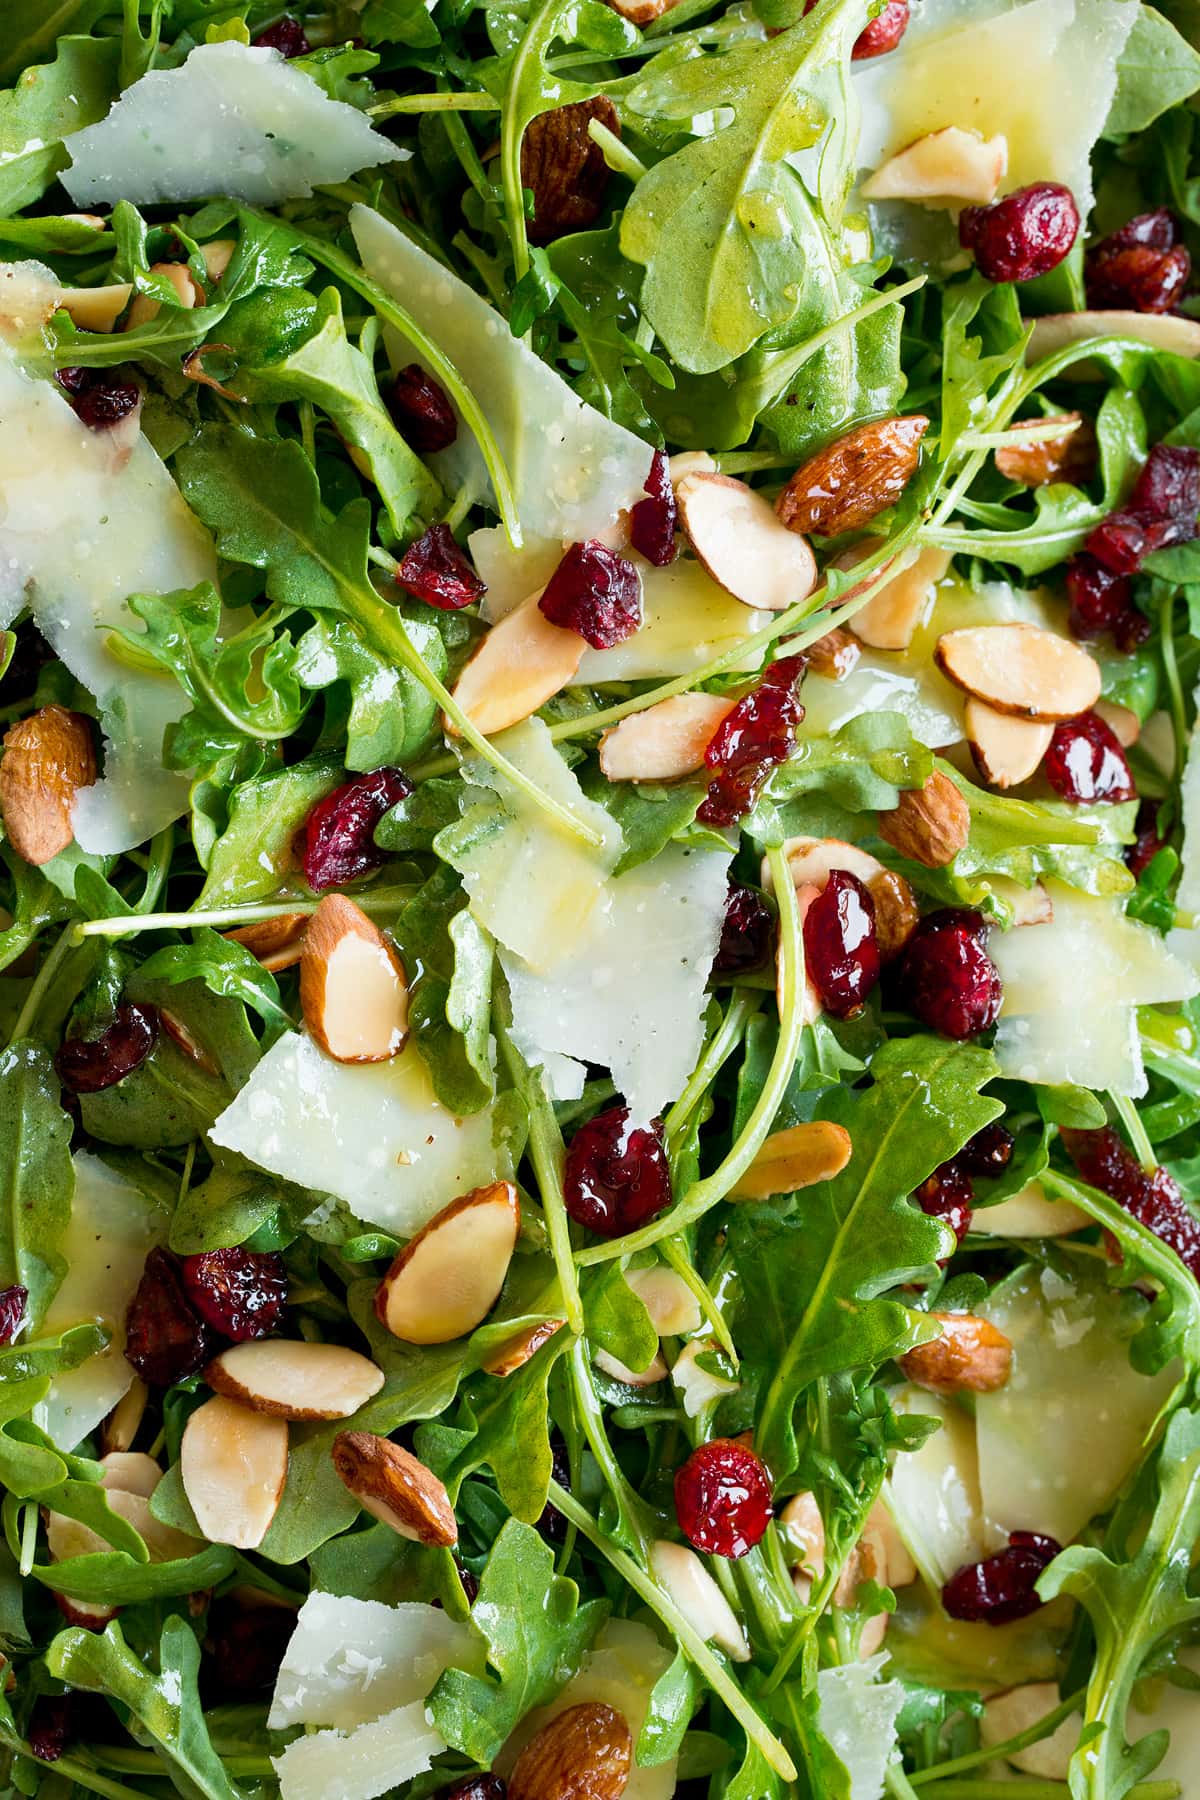 Close up photo of arugula salad showing baby arugula, dried cranberries, almonds, parmesan and dressing.